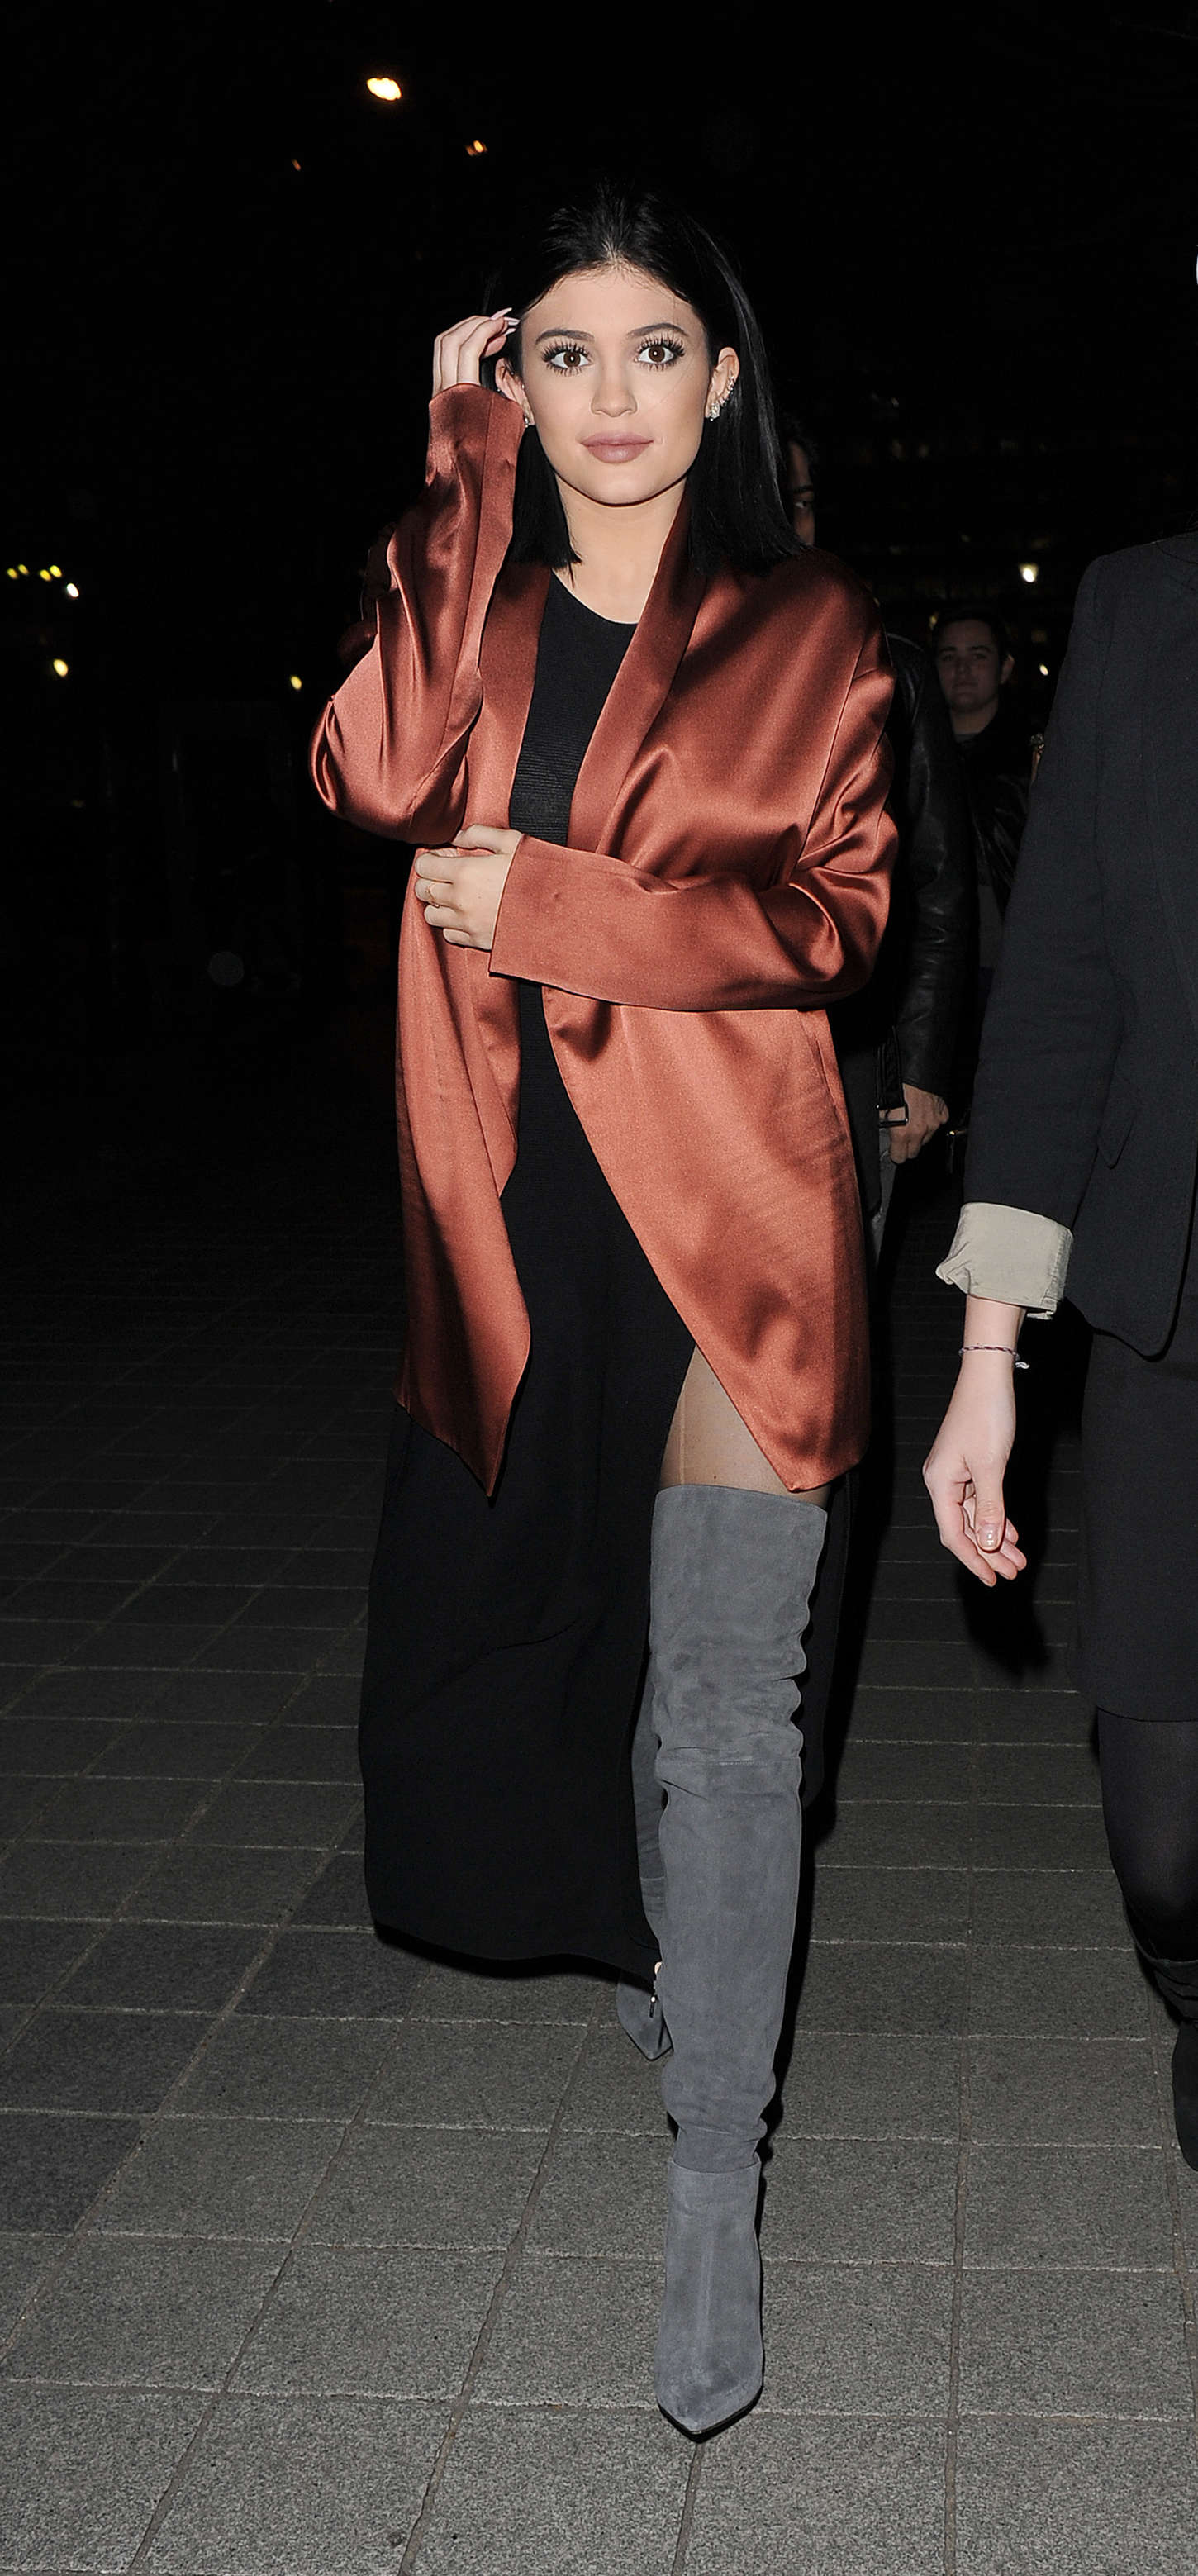 Kylie-Jenner-Night-Out-in-London--09.jpg